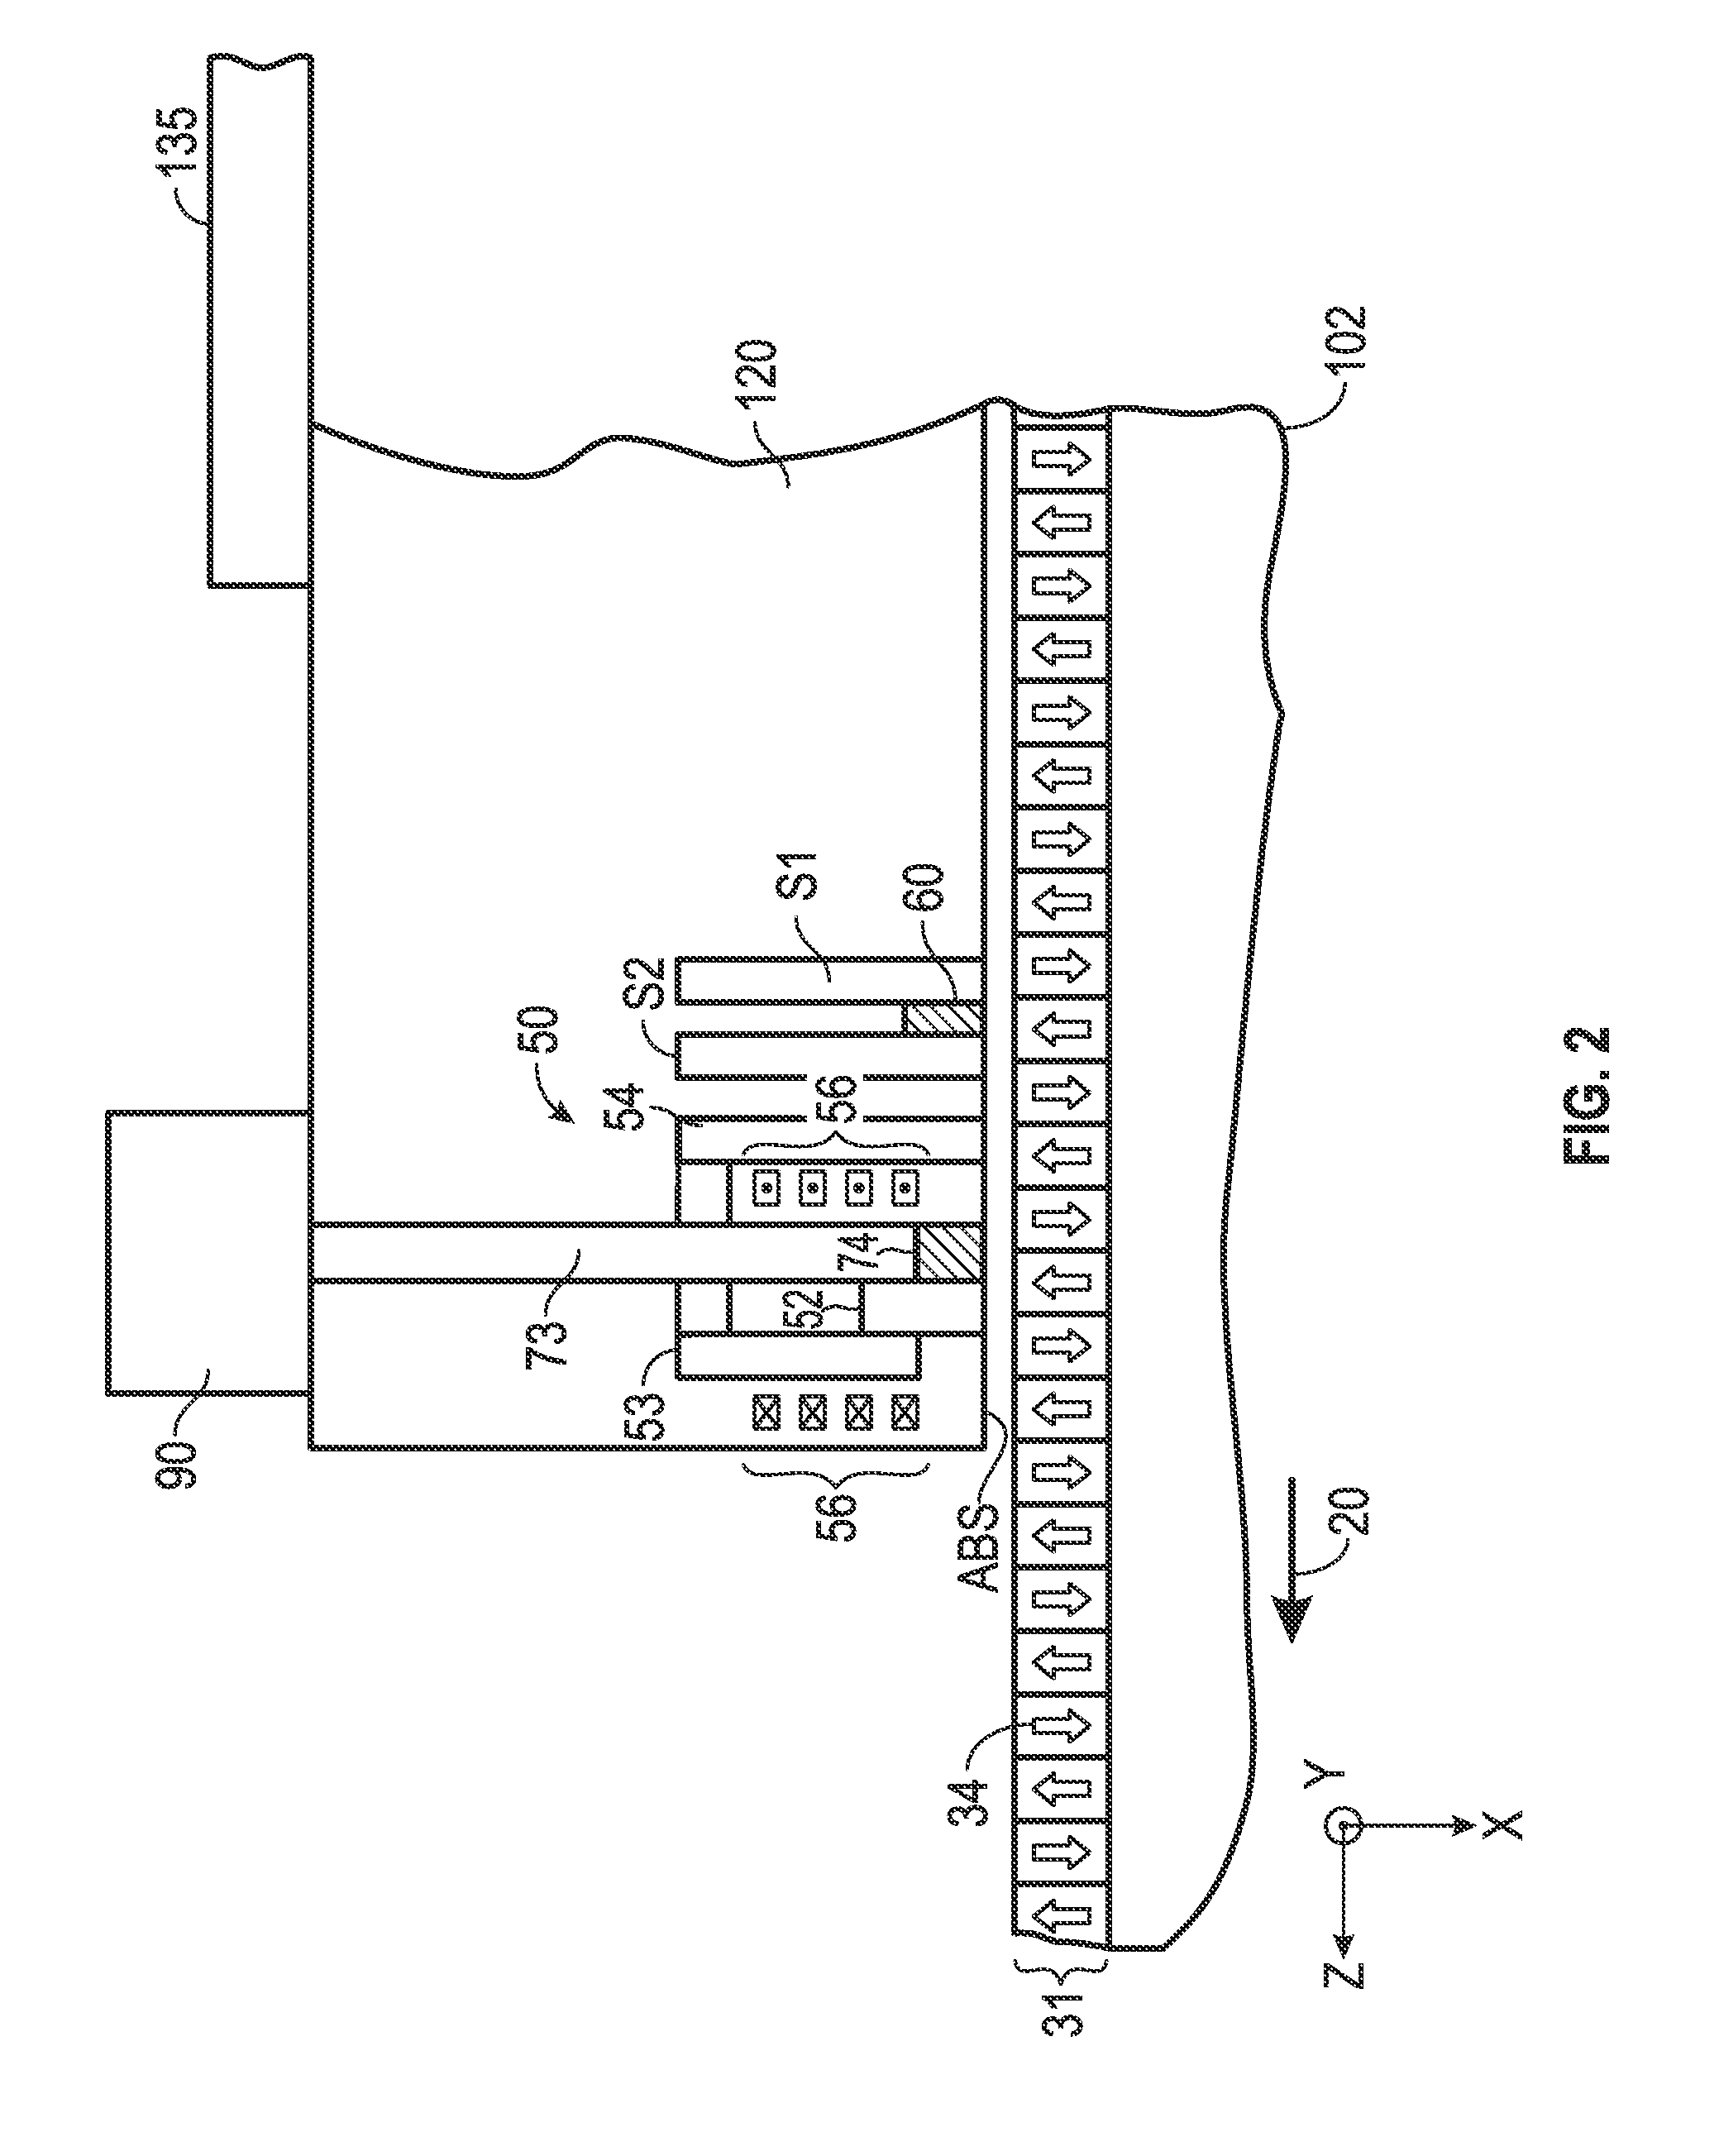 Heat-assisted magnetic recording (HAMR) head with diffusion barrier between waveguide core and write pole lip